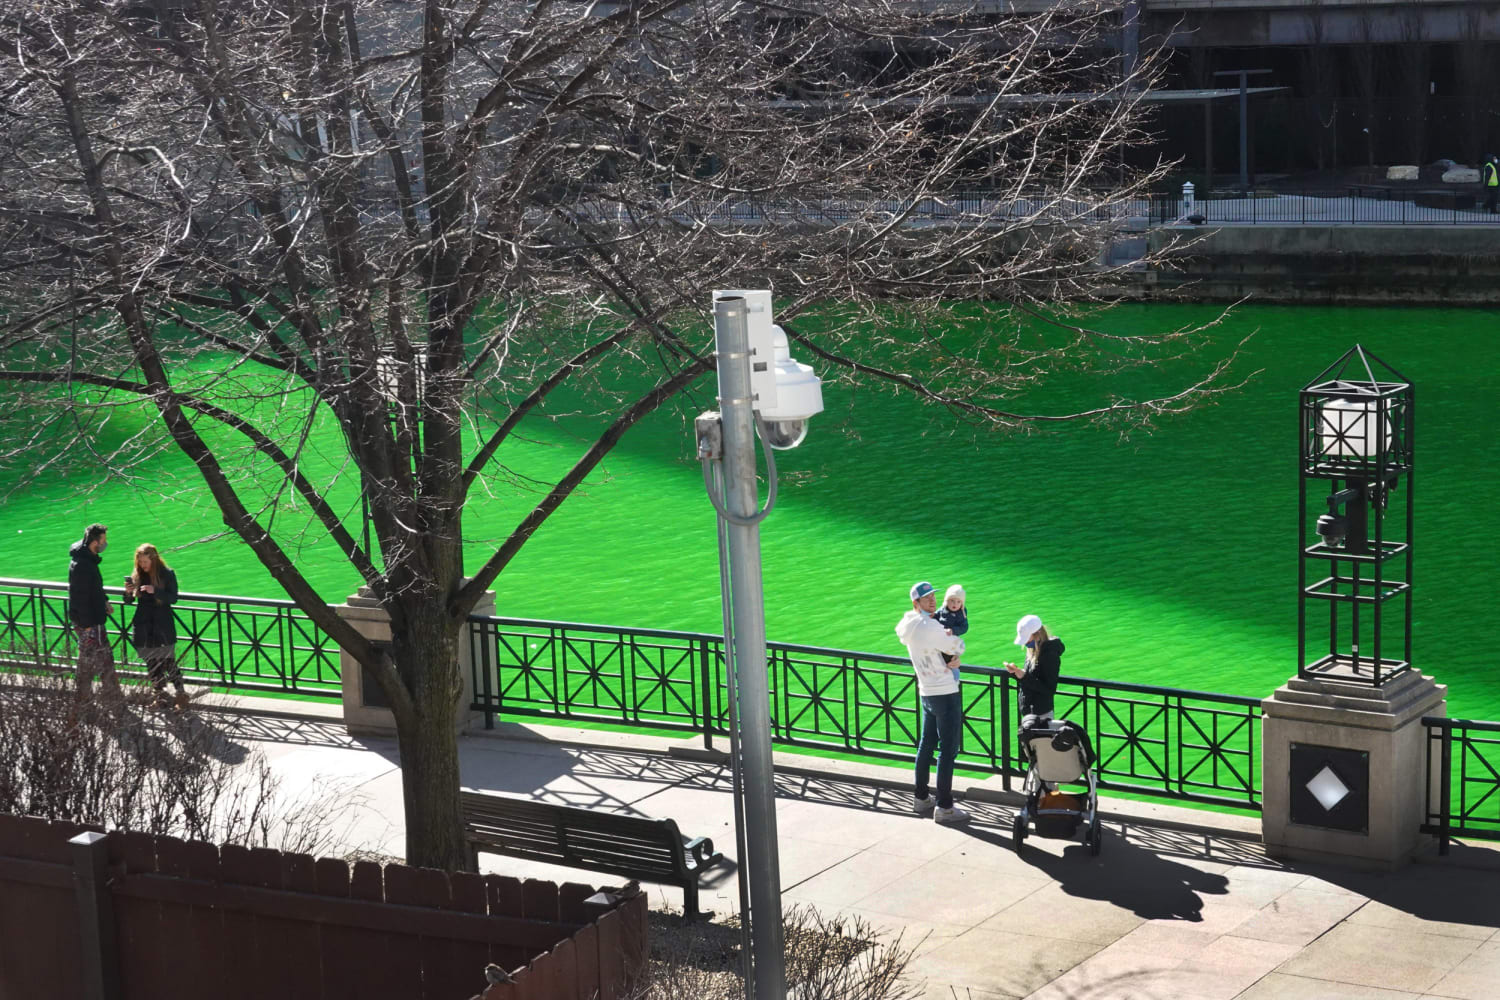 File:Chicago River dyed green St Patricks Day 2021.jpg - Wikipedia